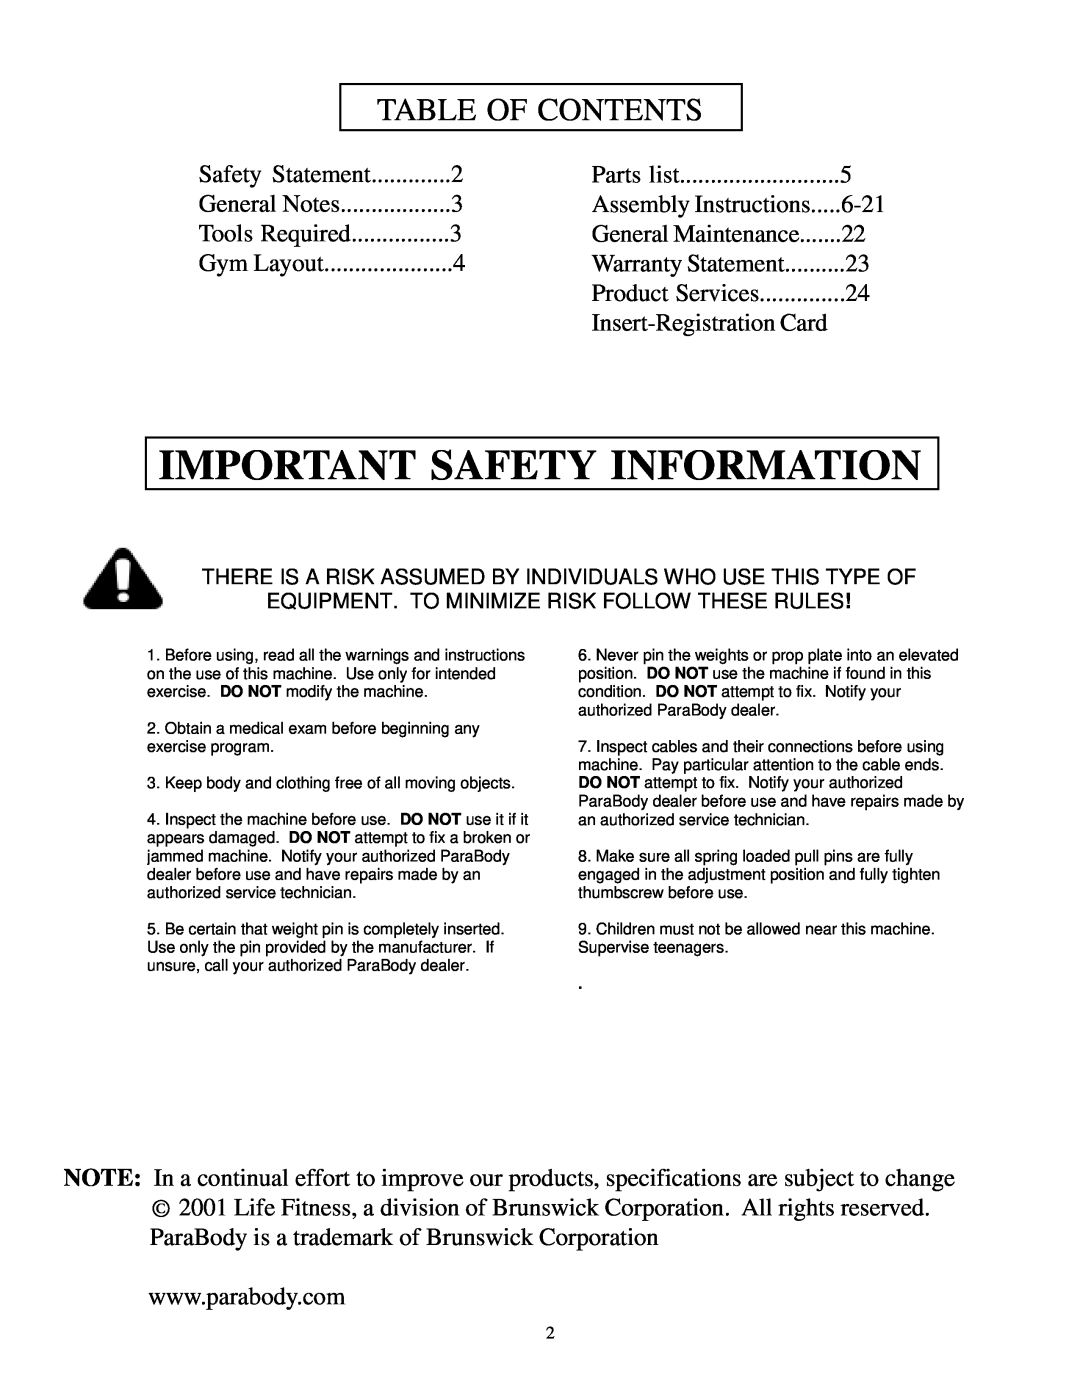 ParaBody 220 manual Important Safety Information, Table Of Contents, Assembly Instructions, Parts list, General Maintenance 